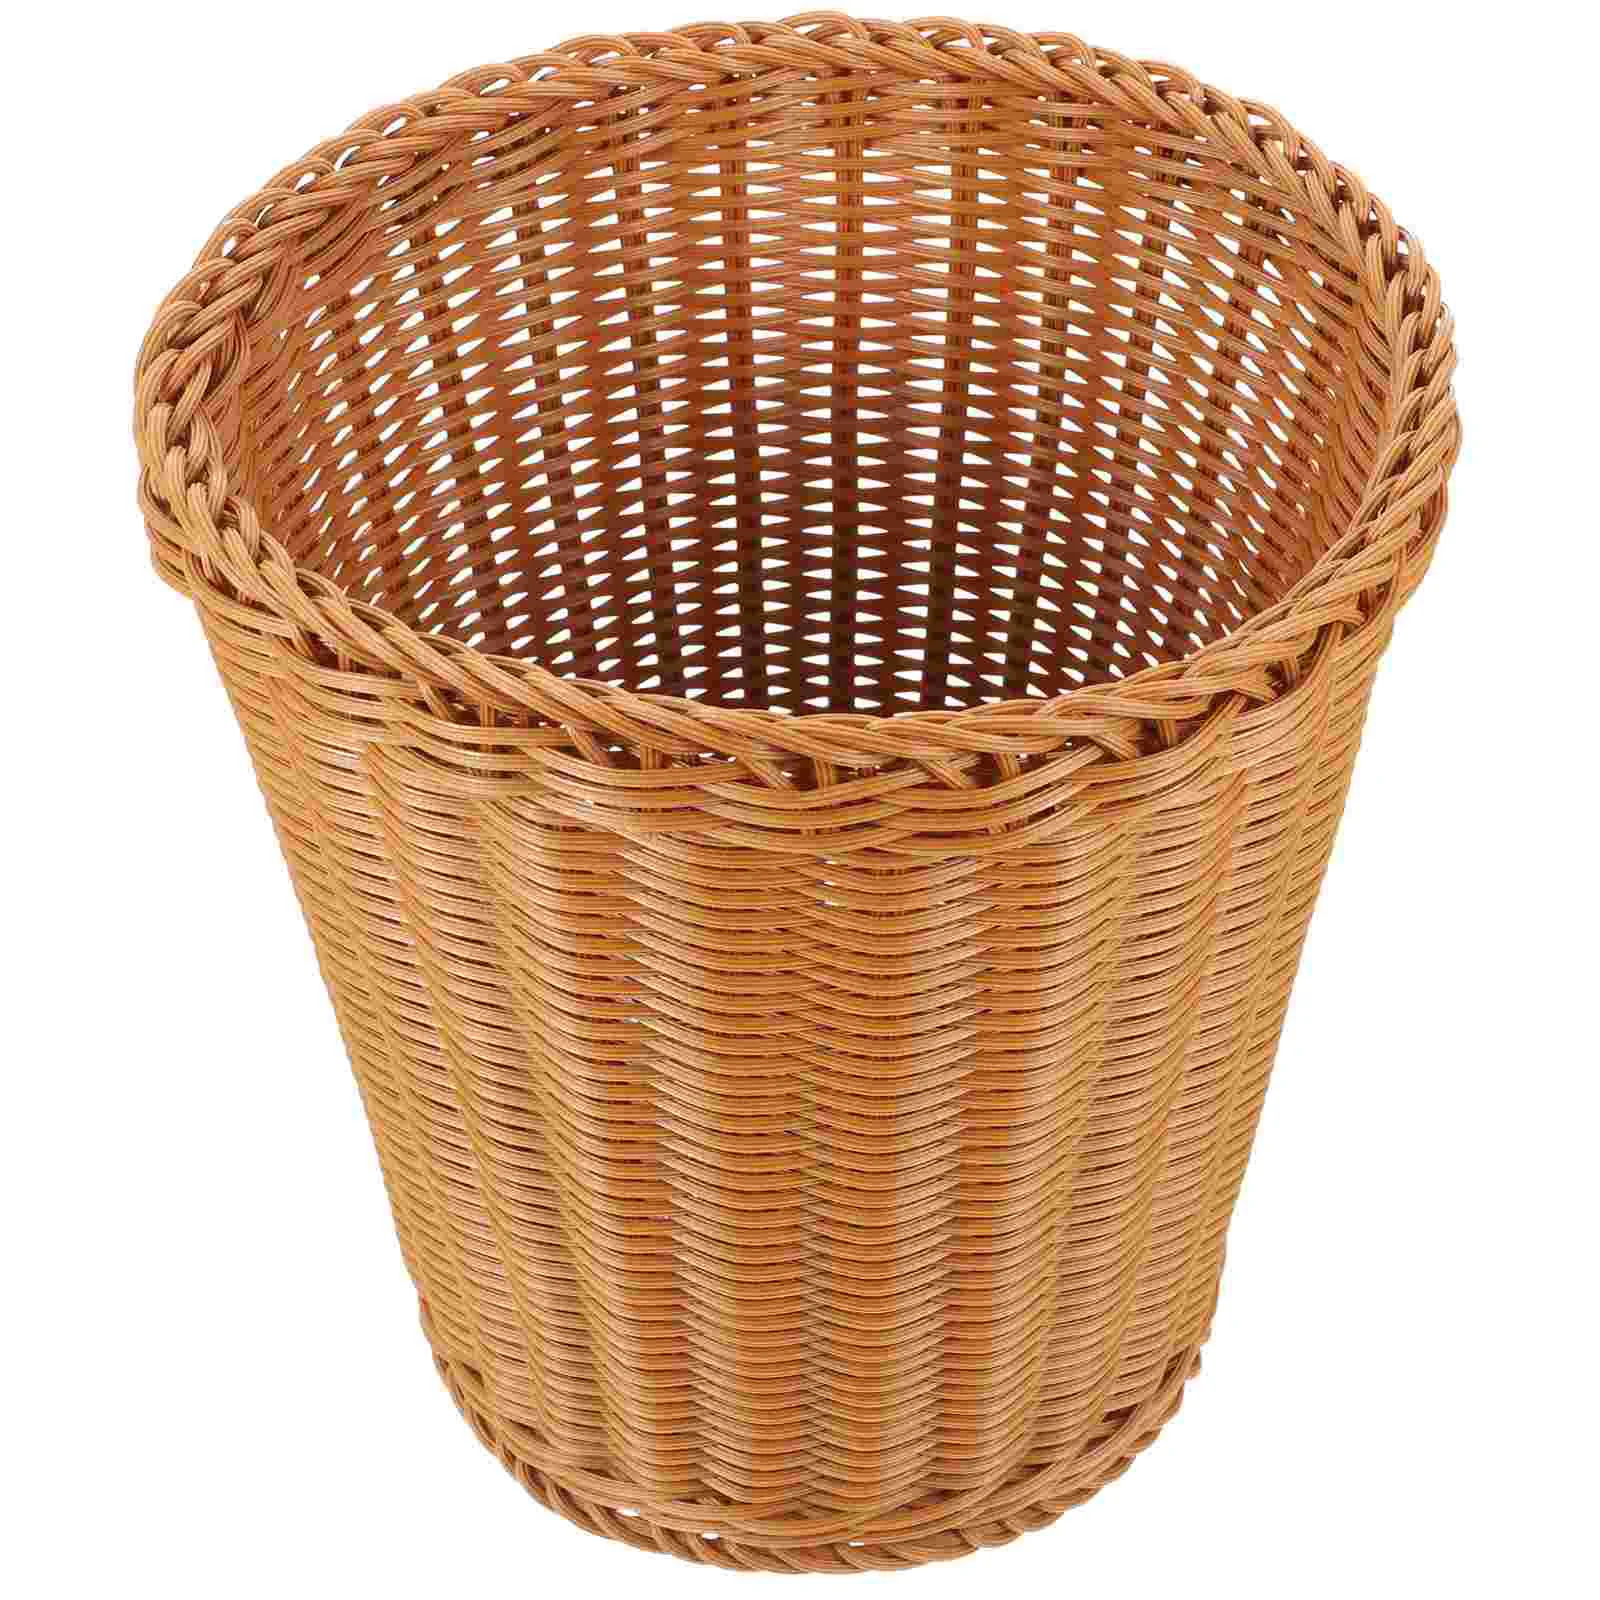 

Rattan Trash Can Bins Sundries Container Decorative Woven Basket Imitation Storage Plastic Household Office Wastepaper